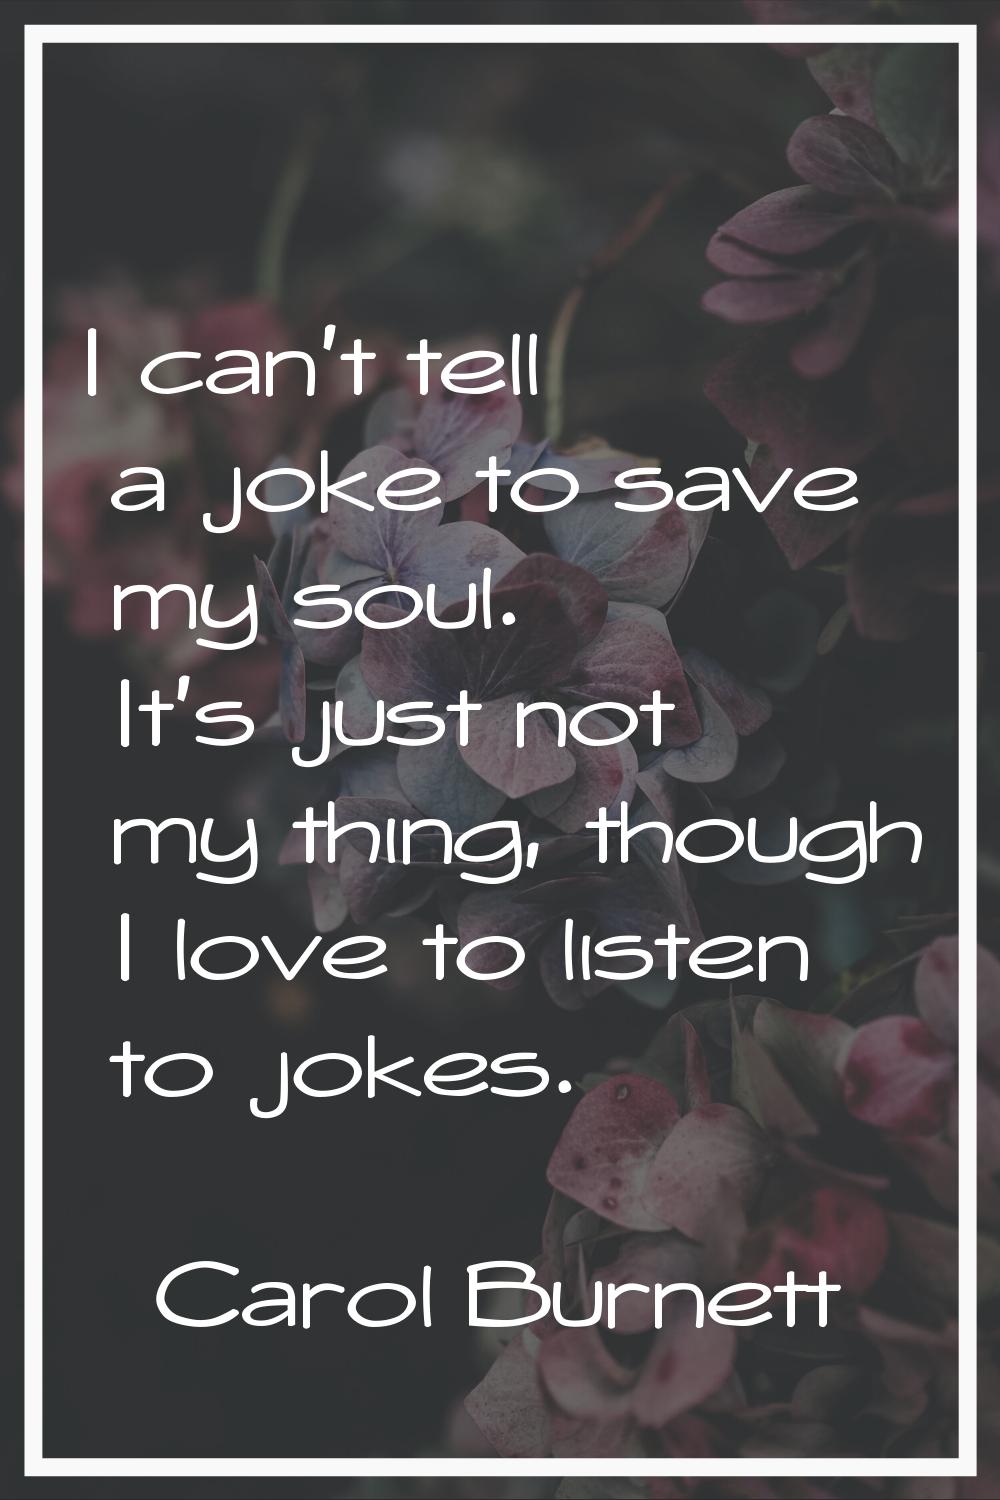 I can't tell a joke to save my soul. It's just not my thing, though I love to listen to jokes.